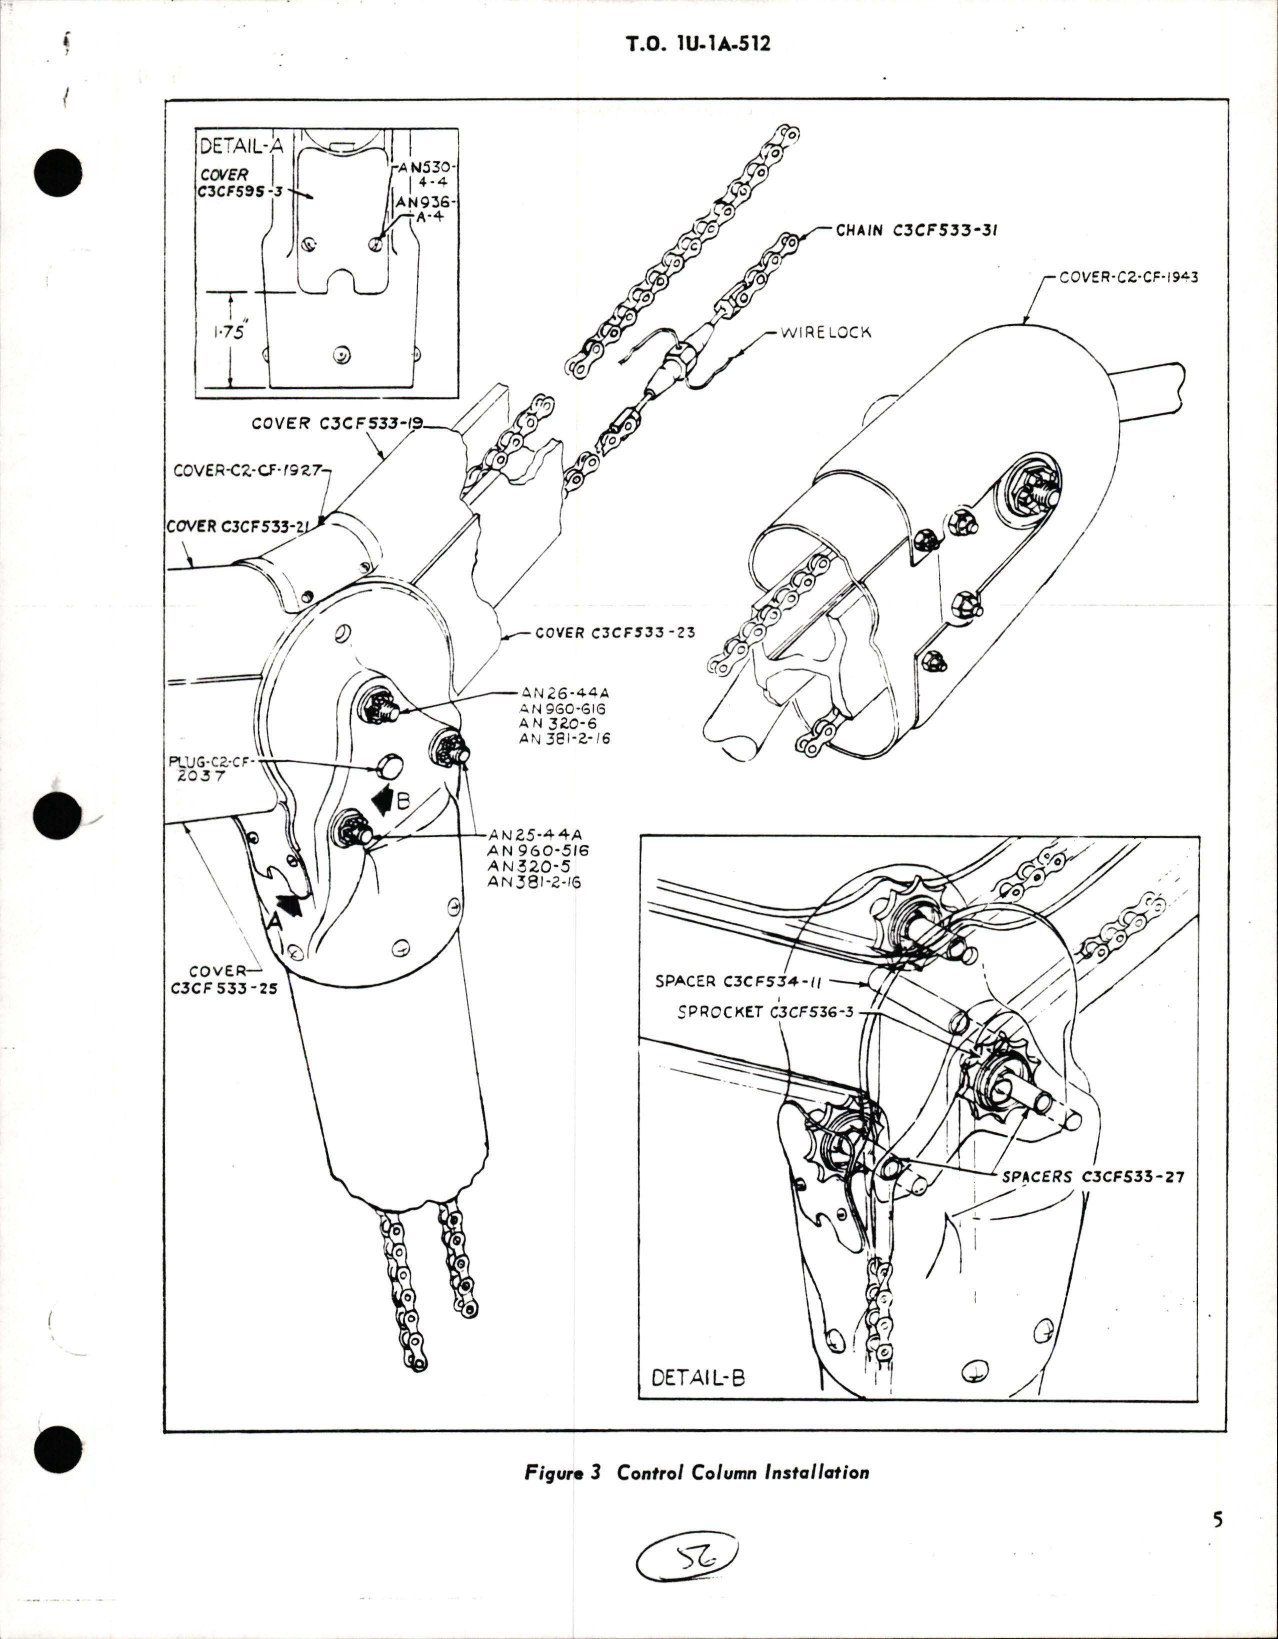 Sample page 5 from AirCorps Library document: Installation of Dual Control Column on YU-1 & U-1A